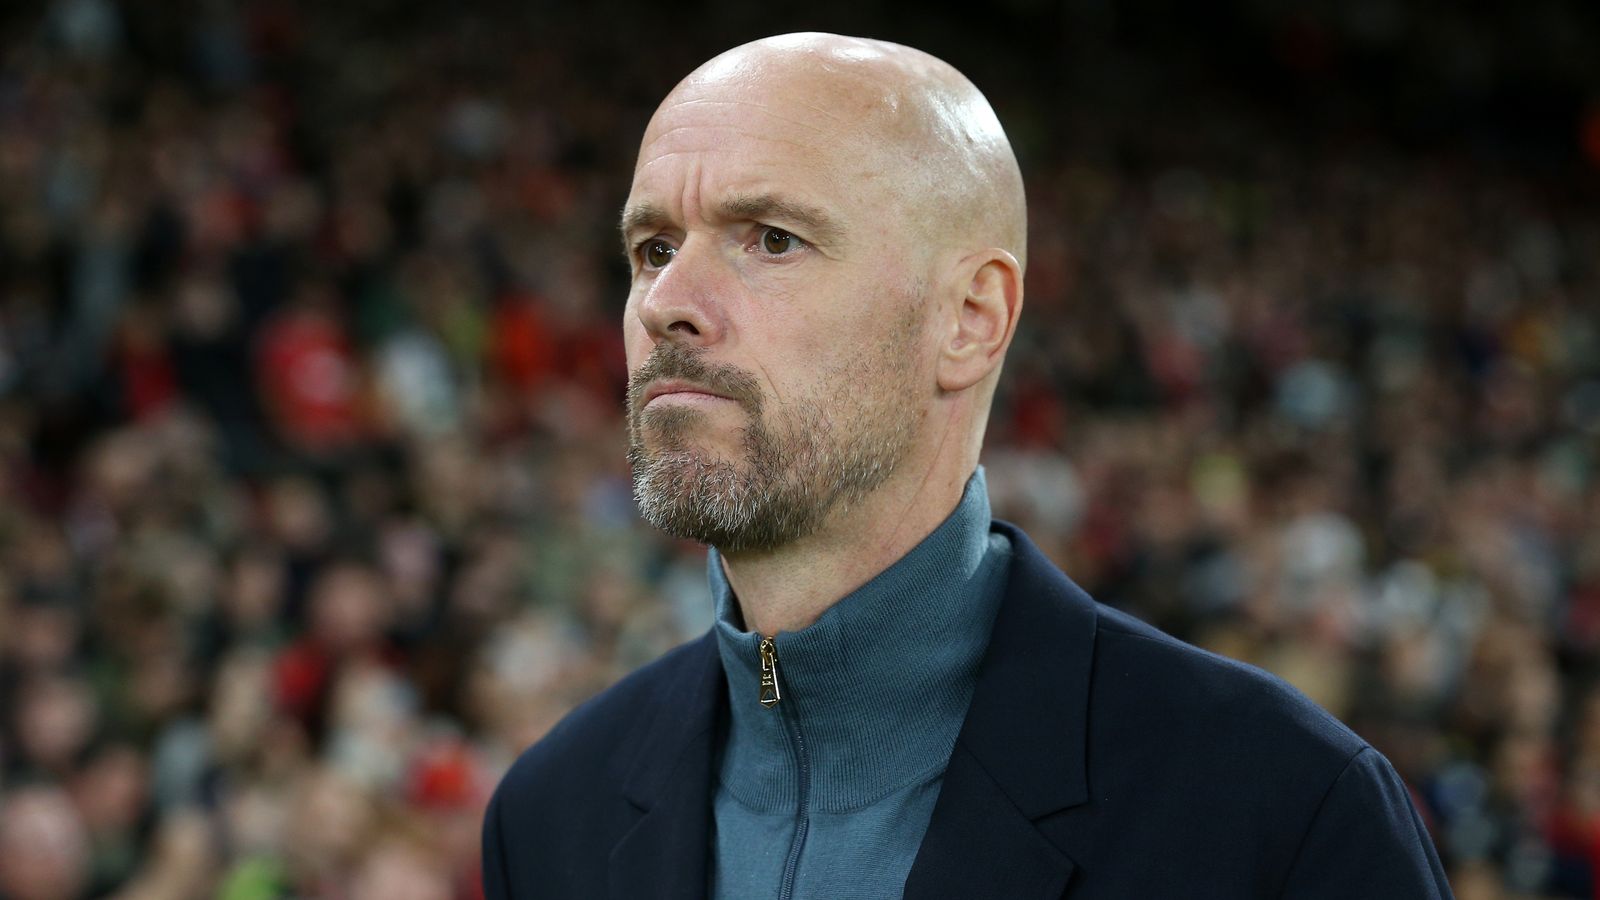 Erik ten Hag: Manchester United manager targeting top four and trophies ahead of Premier League resumption